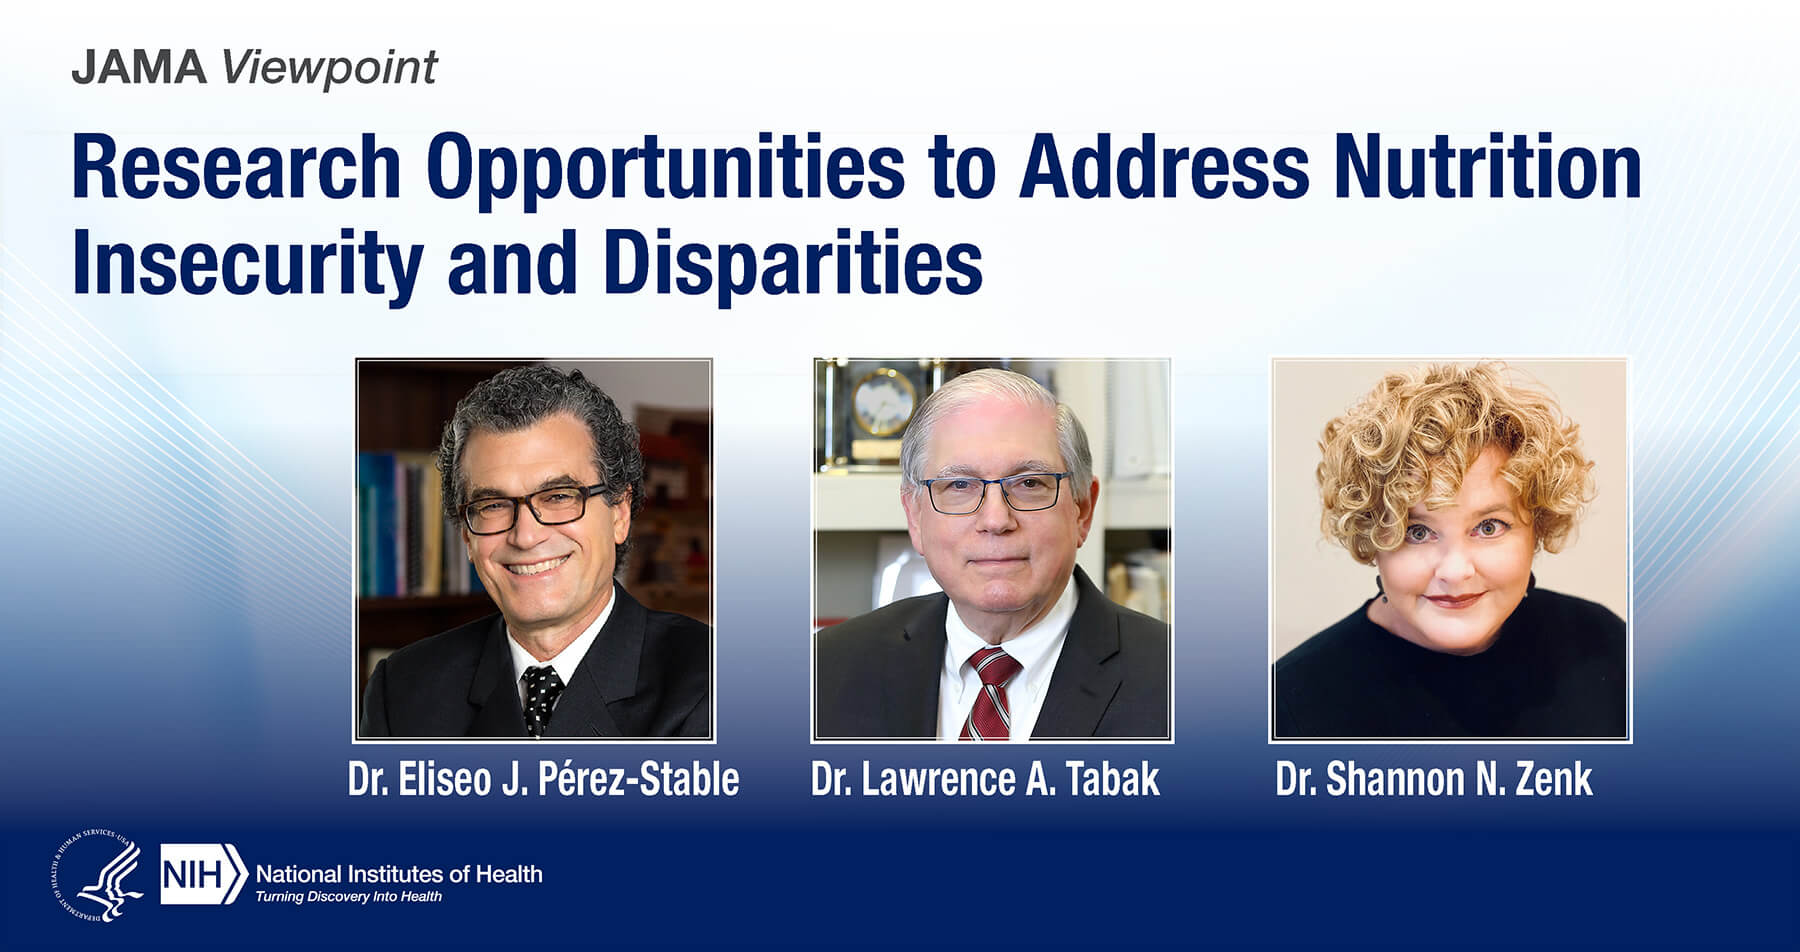 Drs. Perez-Stable, Tabak, and Zenk outline research to address nutrition insecurity in JAMA viewpoint.